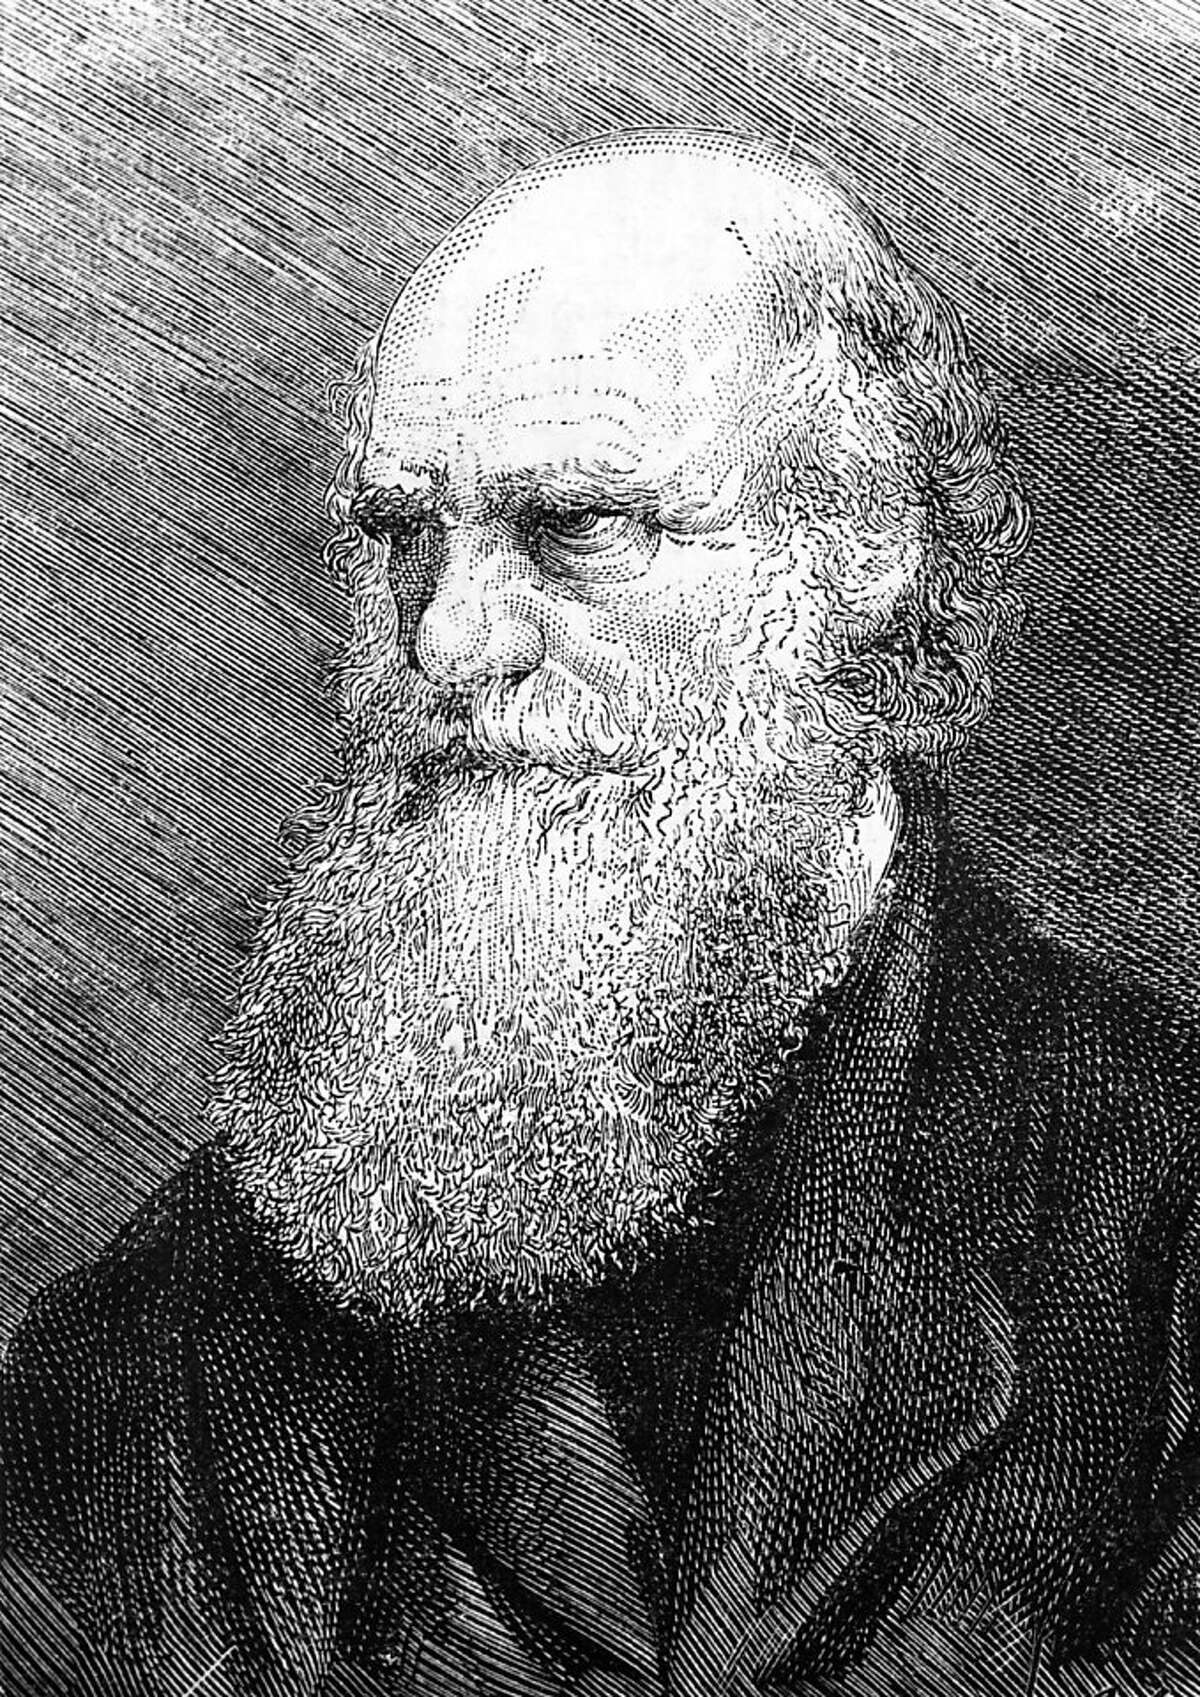 TO GO WITH THE STORY IN FRENCH BY BORIS CAMBRELENG: " BICENTENAIRE DE CHARLES DARWIN, FONDATEUR DE LA BIOLOGIE MODERNE" - This undated engraving released on February 10, 1959 showing English naturalist Charles Darwin ( 1809-1882), father of the theory of evolution meaning that all species of life have evolved over time from common ancestors through the process he called natural selection. AFP PHOTO (Photo credit should read -/AFP/Getty Images) Ran on: 02-10-2009